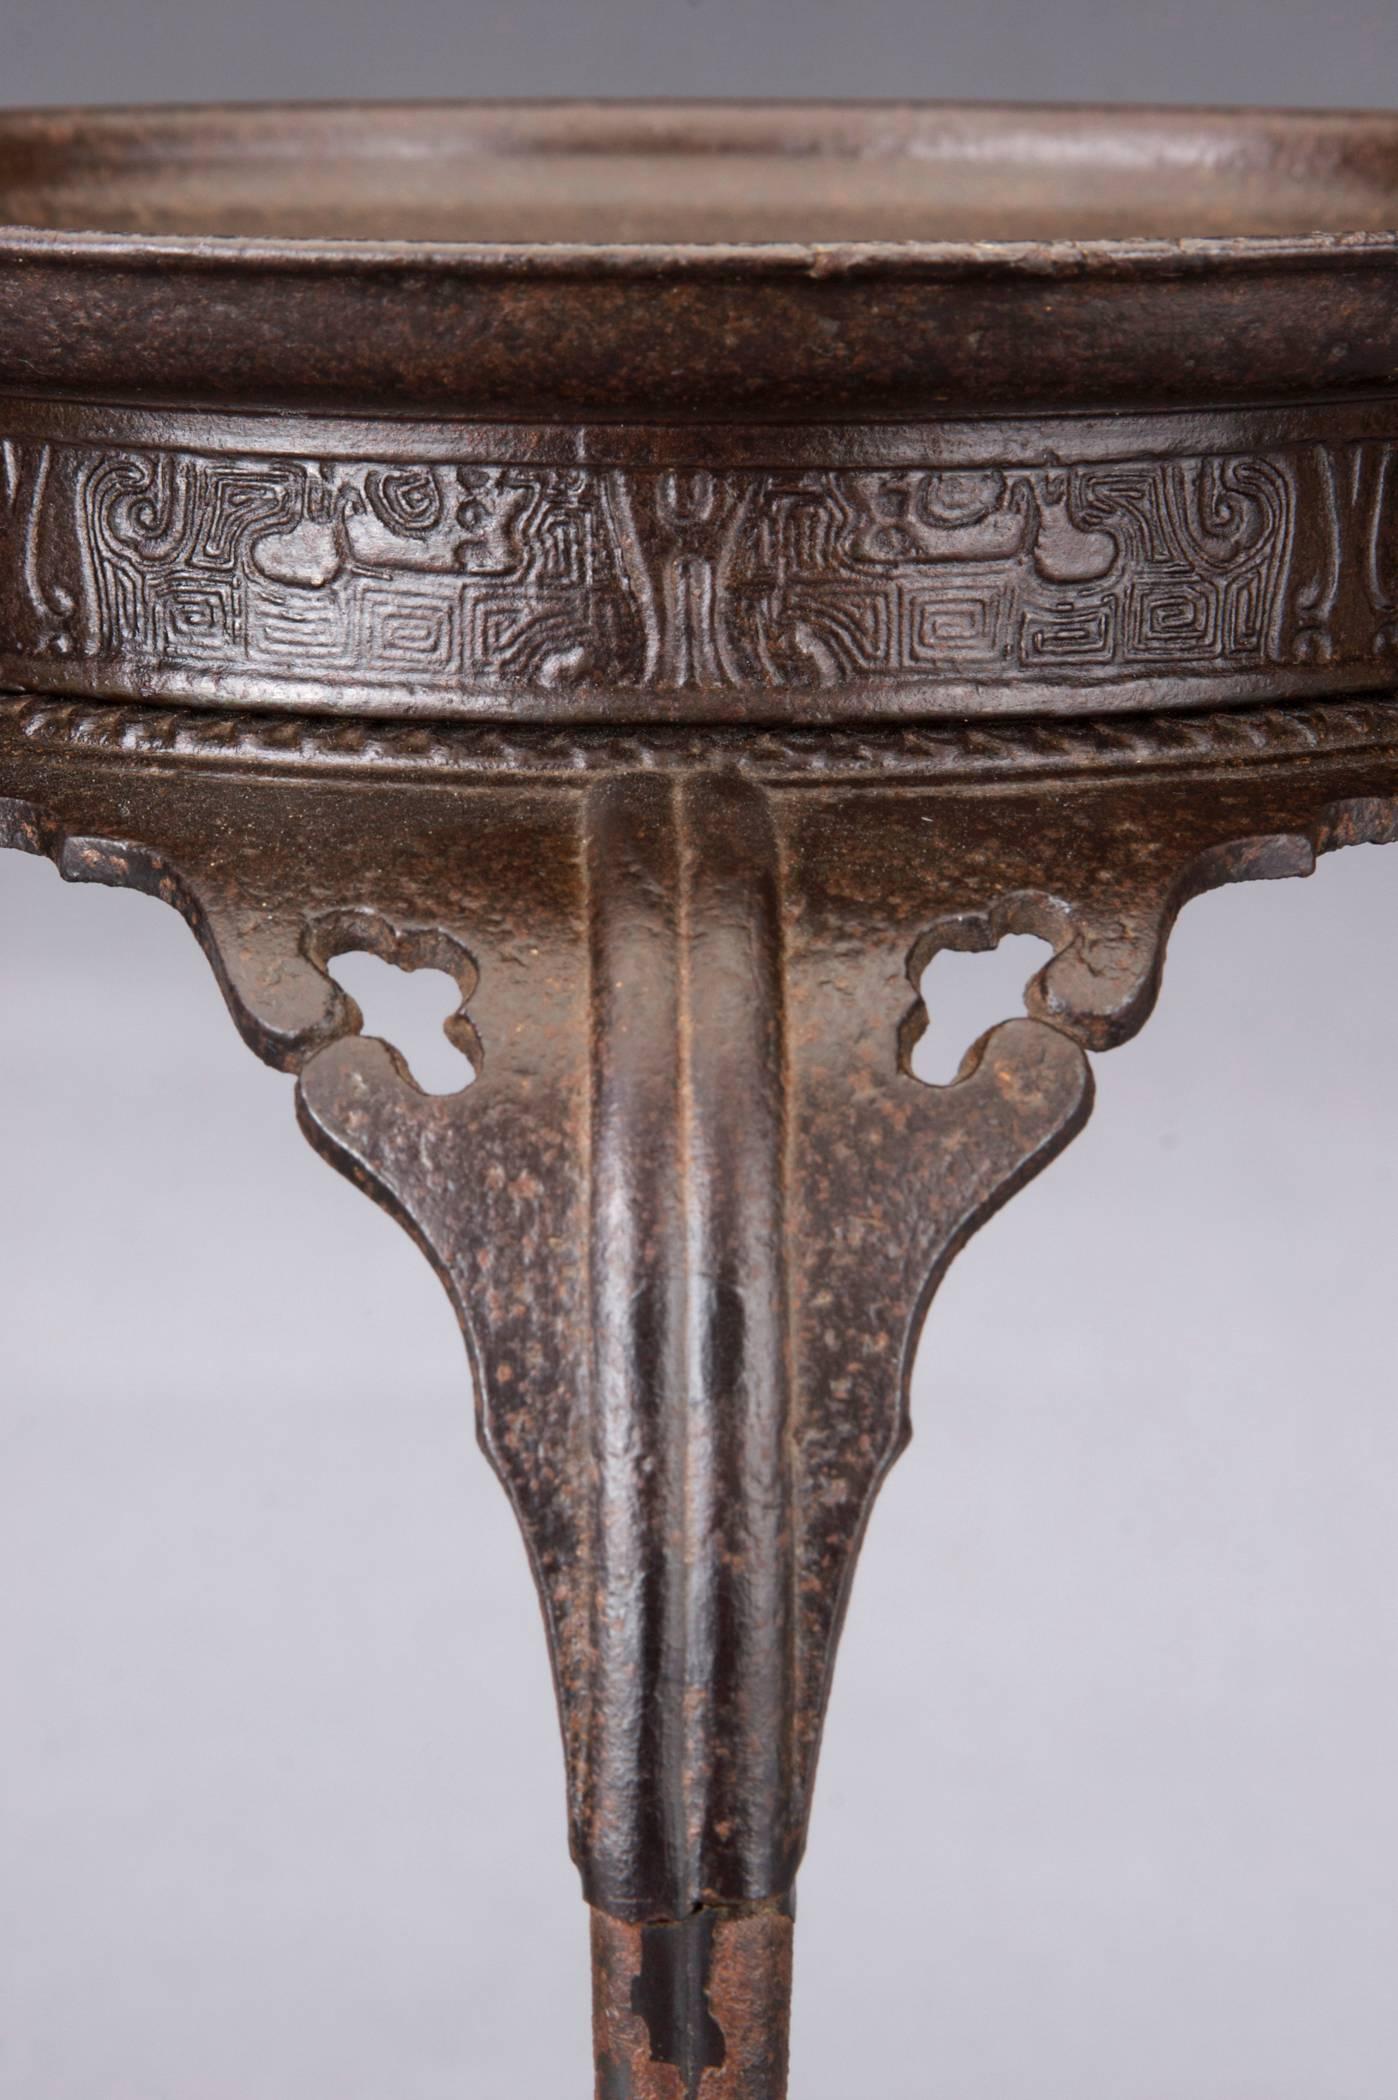 Outstanding quality and beautifully detailed. The circular dish with archaic frieze resting on the four leg stand with scrolled spandrels pierced by cloud openings, ending in scrolled feet.